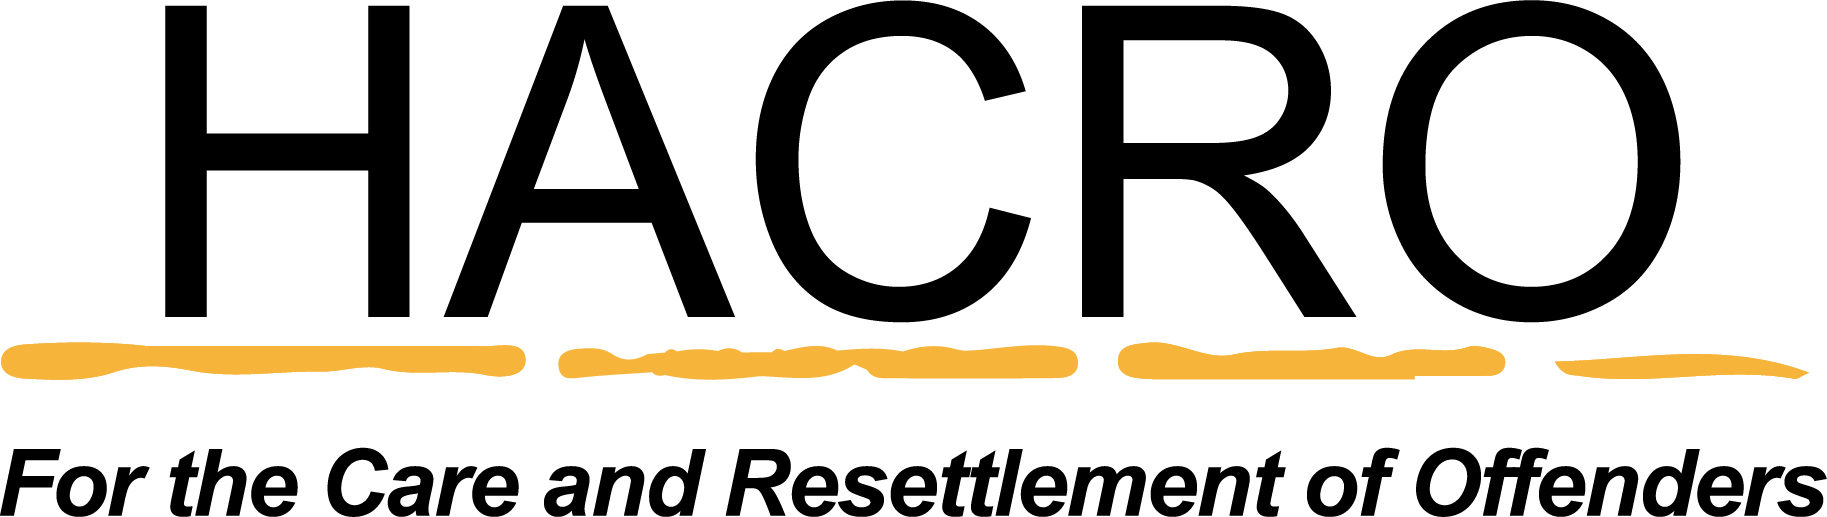 Hertfordshire Association for the Care and Rehabilitation of Offenders (HACRO) logo